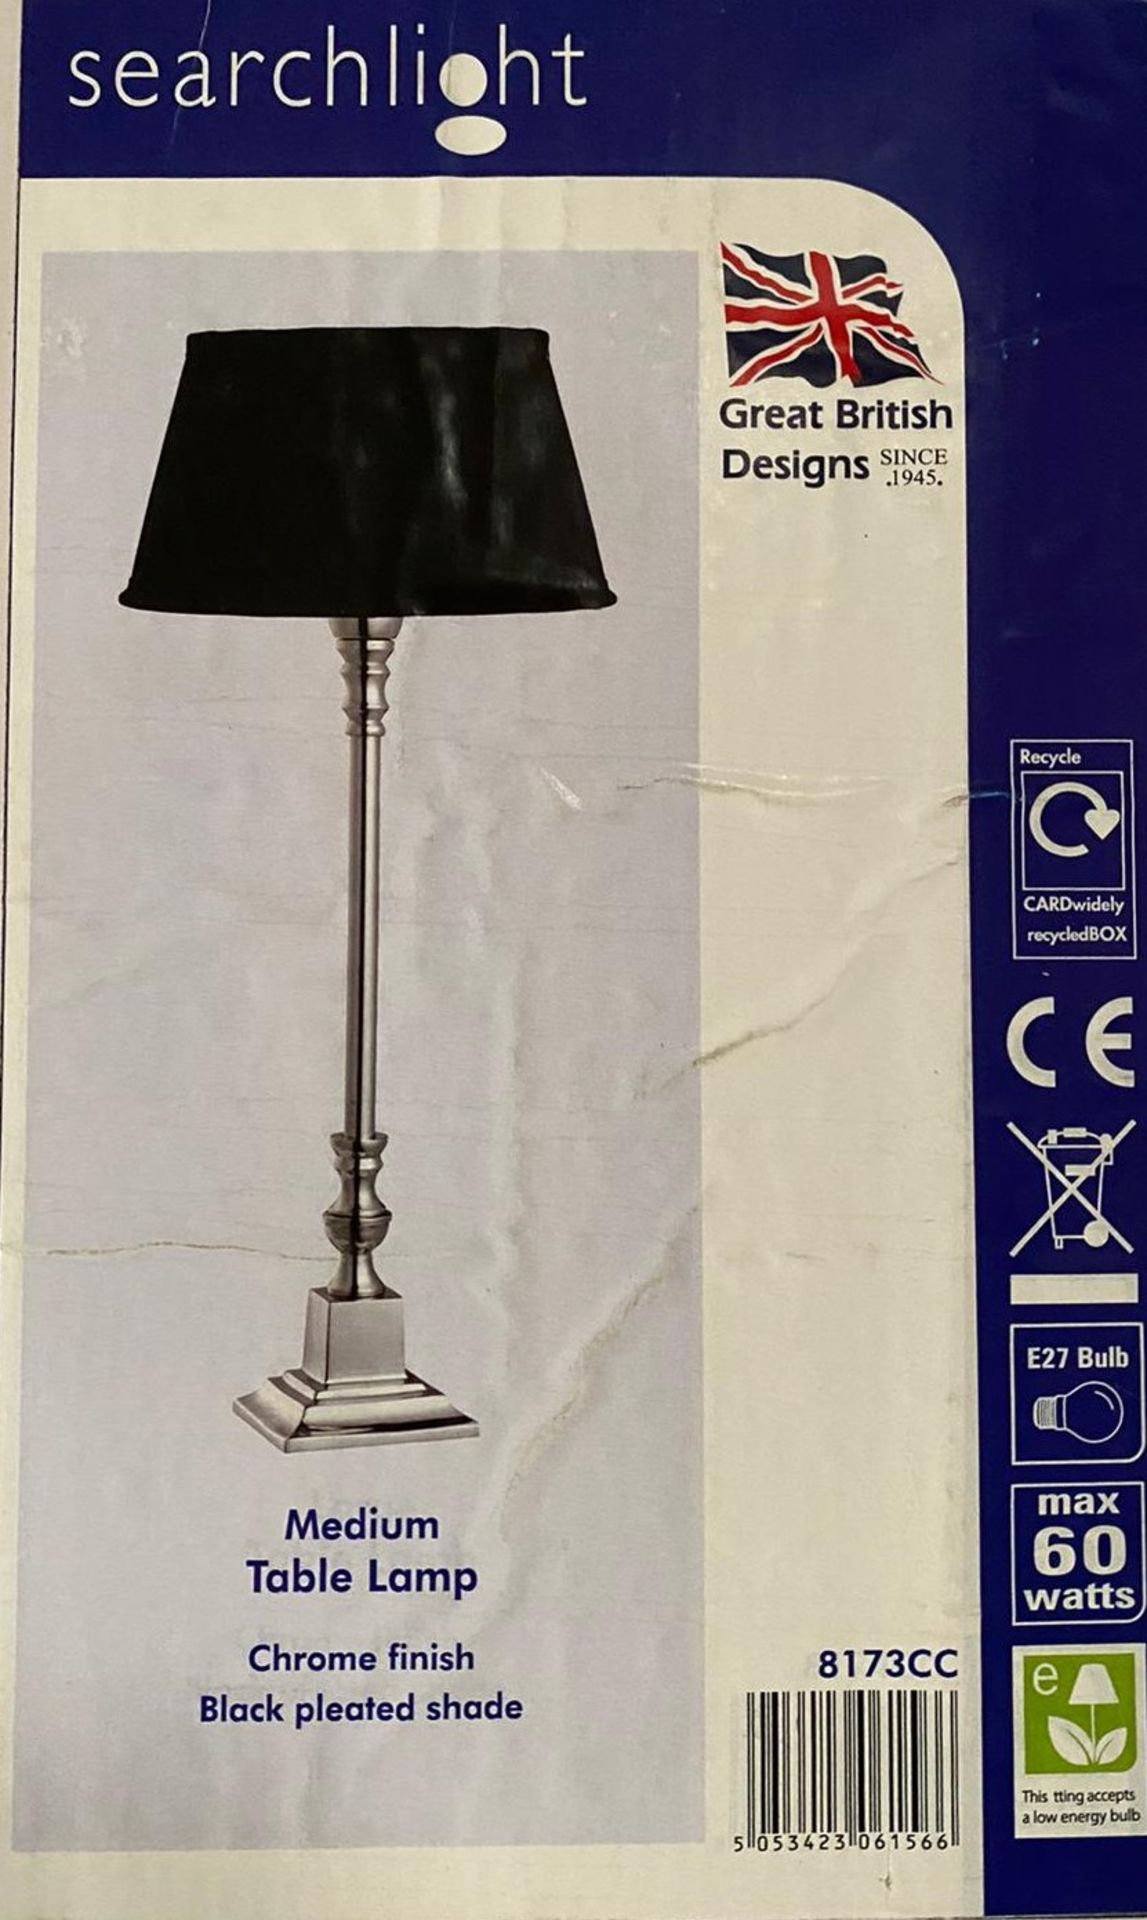 1 x Searchlight Medium Table Lamp in chrome - Ref: 8173CC - New and Boxed - RRP: £90.00